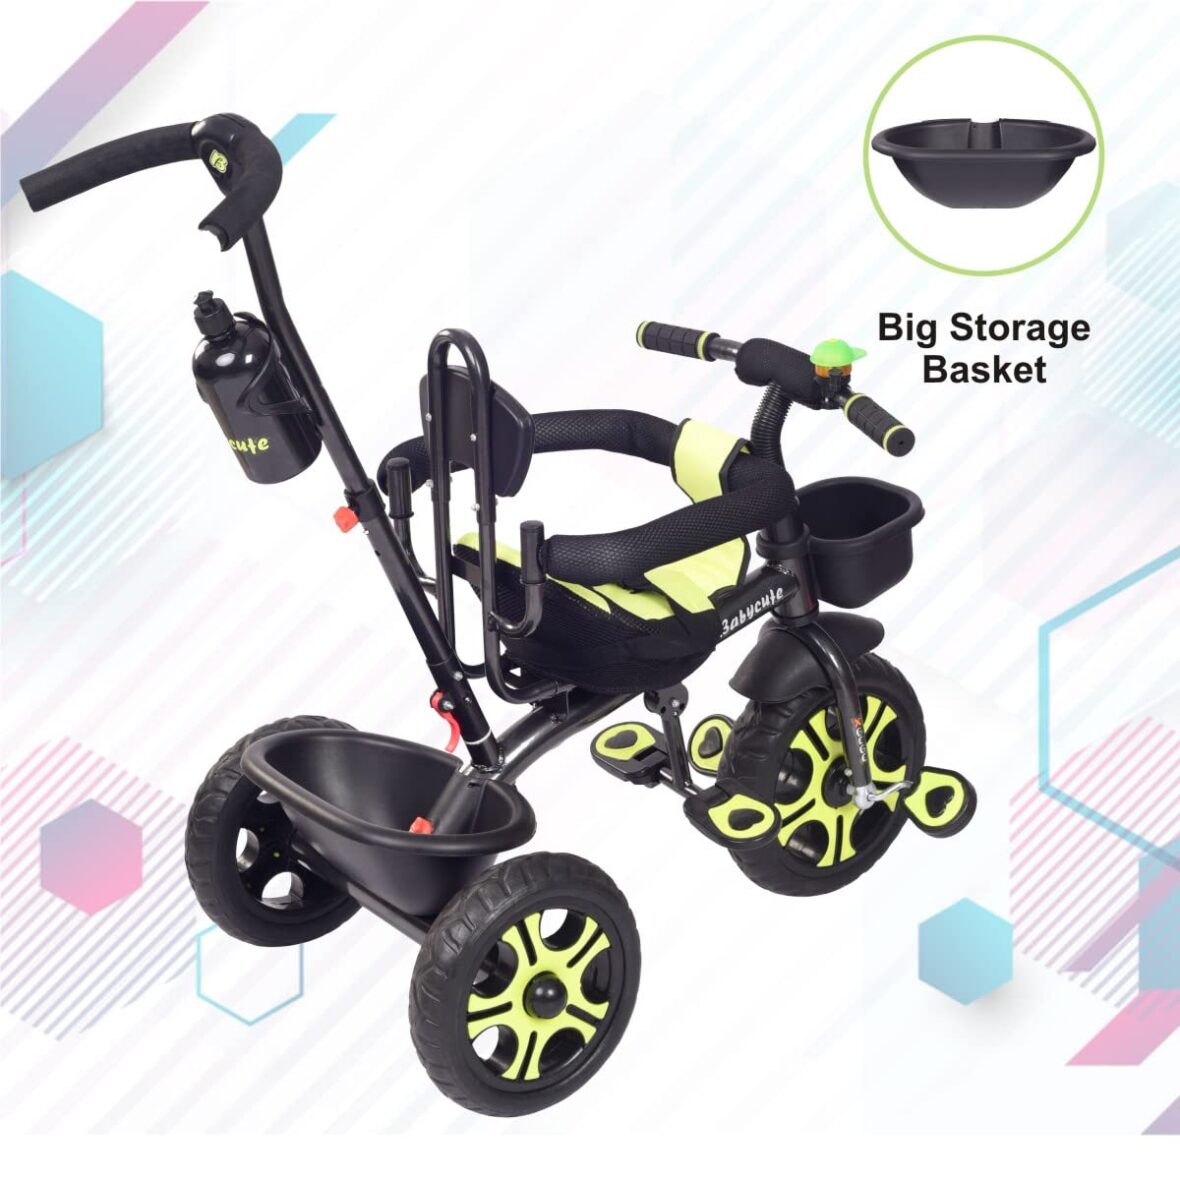 BabyCute V-4 Sports Plug and Play Tricycle for Kids with Parental Control, Baby Cute V4 Baby Cycle for 2-5 Years Old